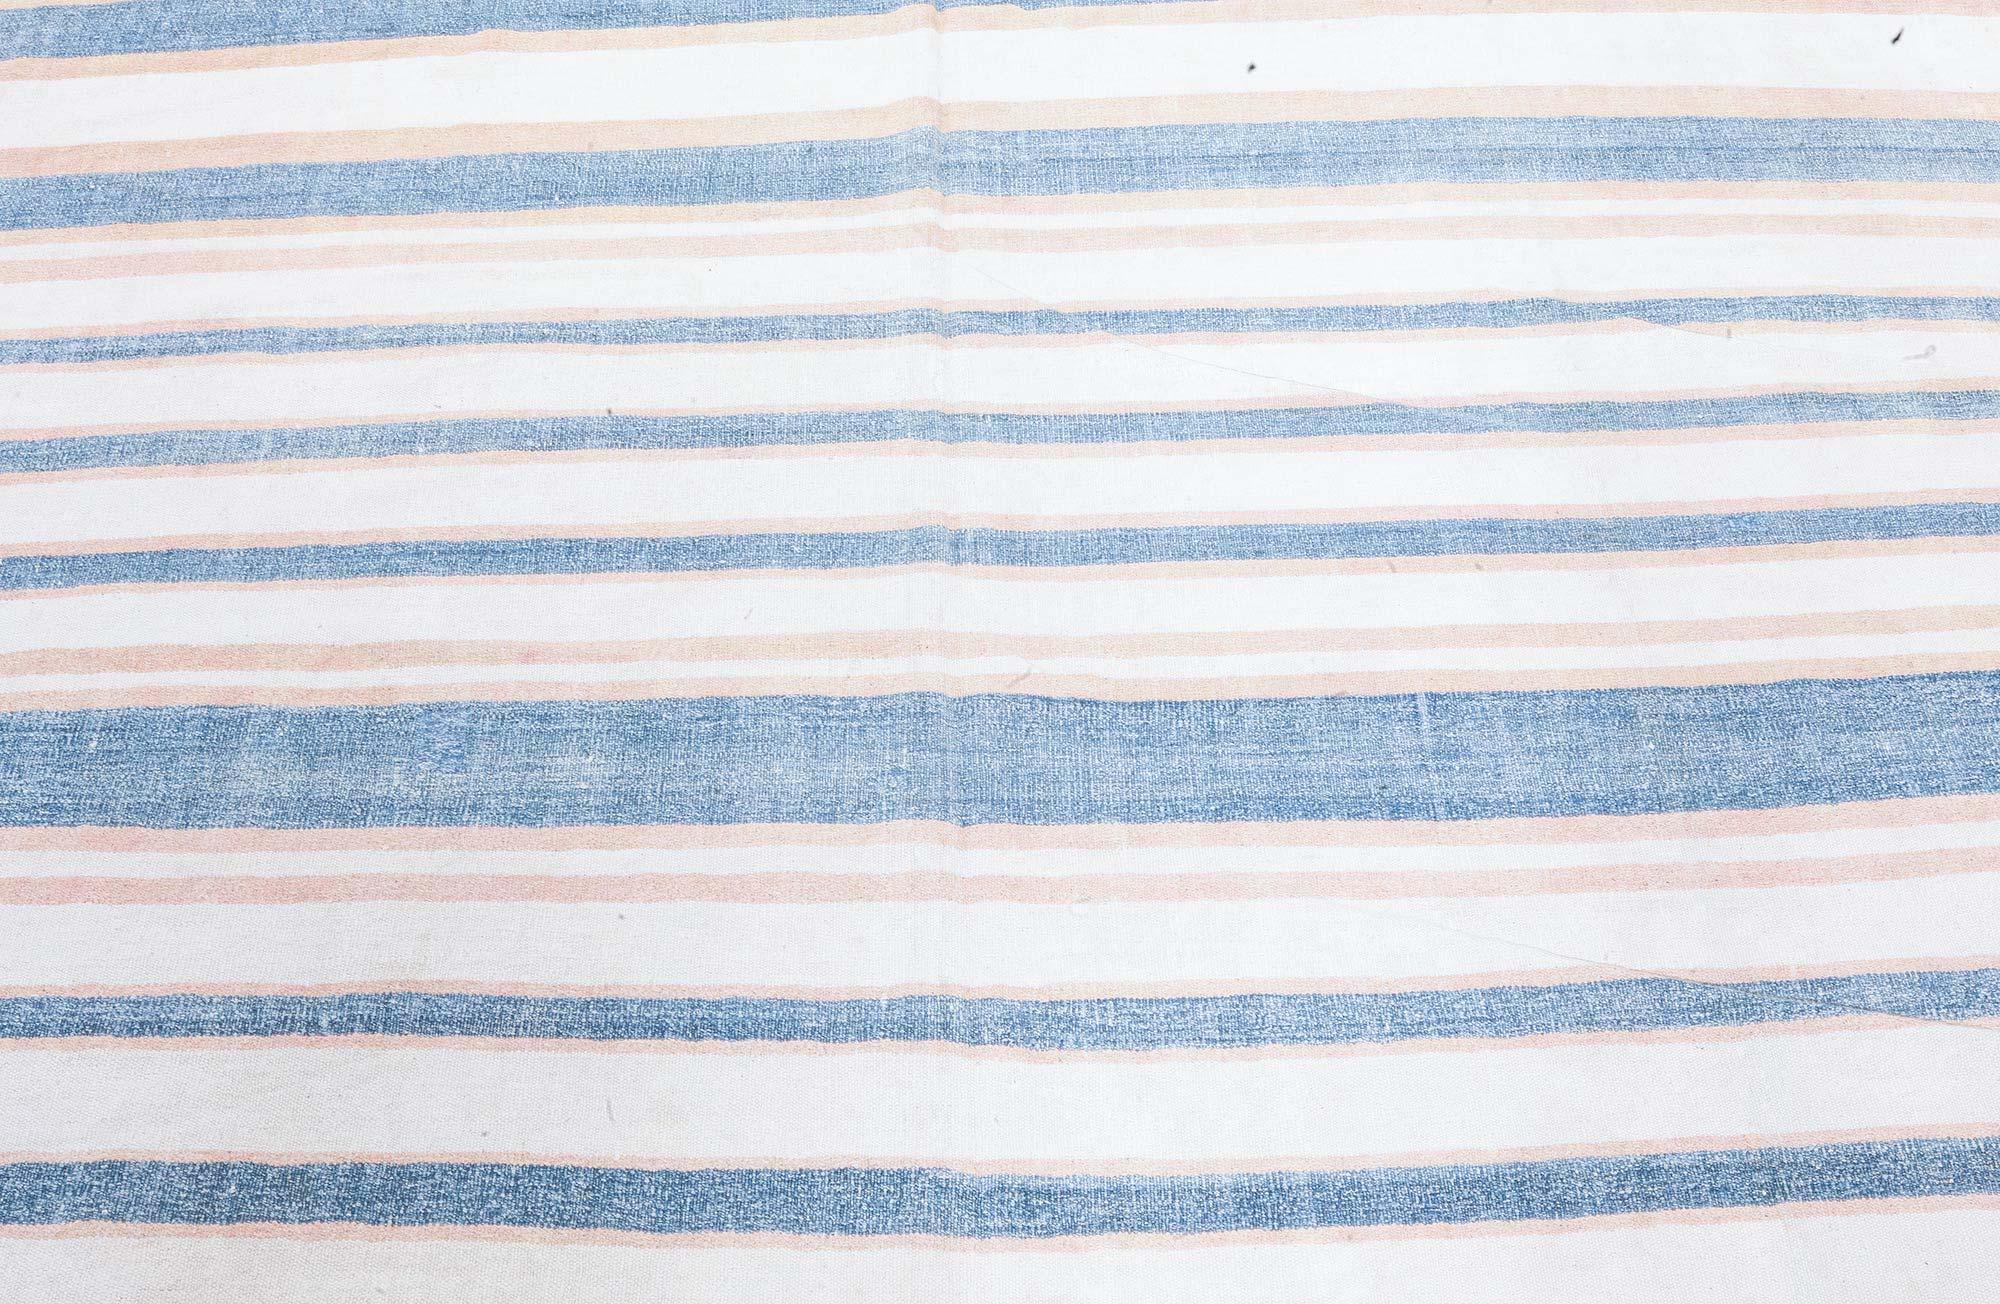 Vintage Indian Dhurrie Striped Blue Beige Rug In Good Condition For Sale In New York, NY